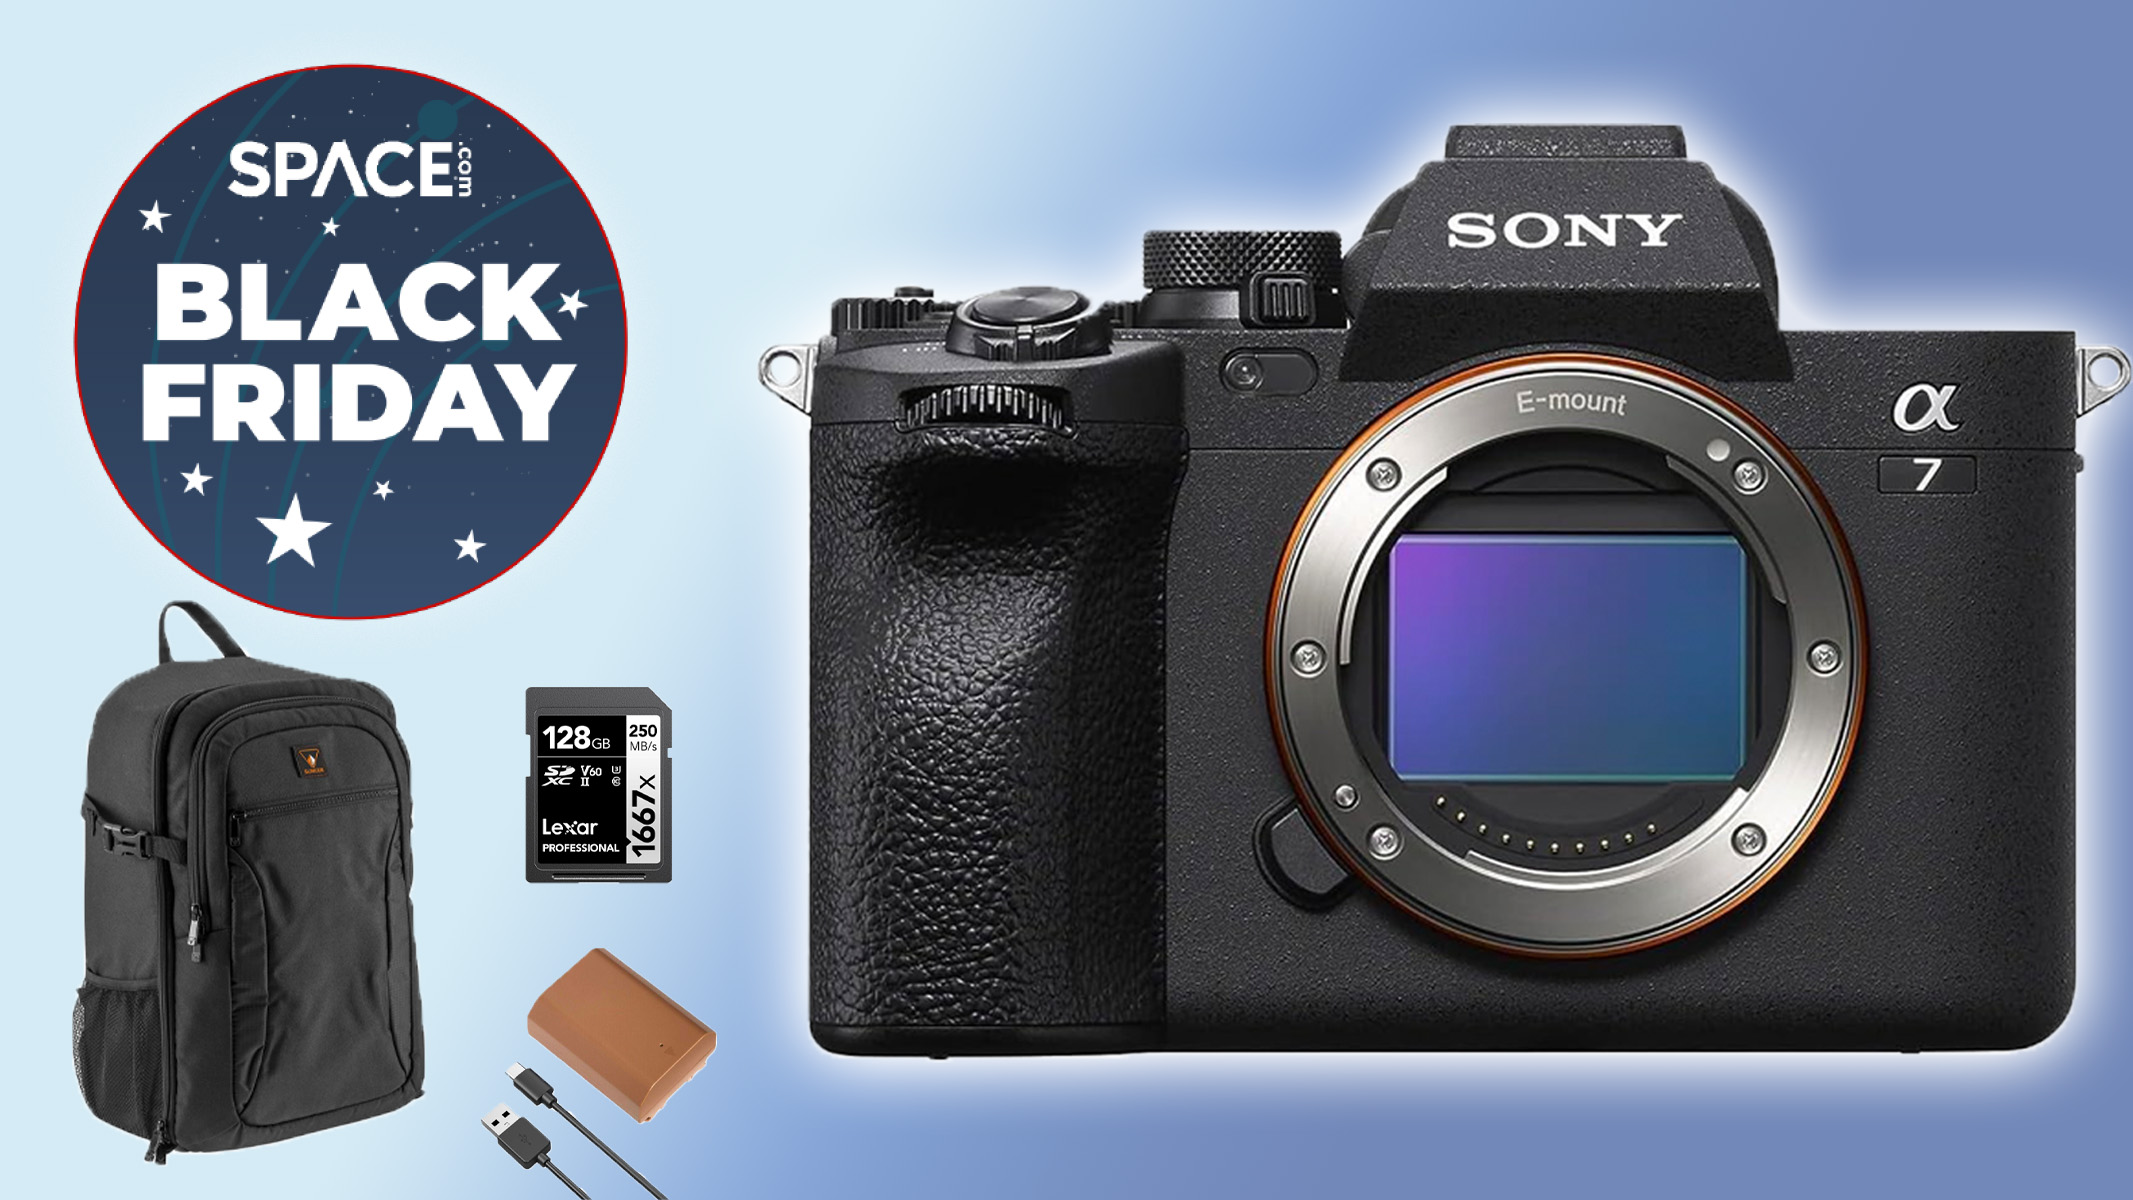  Save $200 on this Sony A7 IV bundle at Adorama in this Black Friday deal 